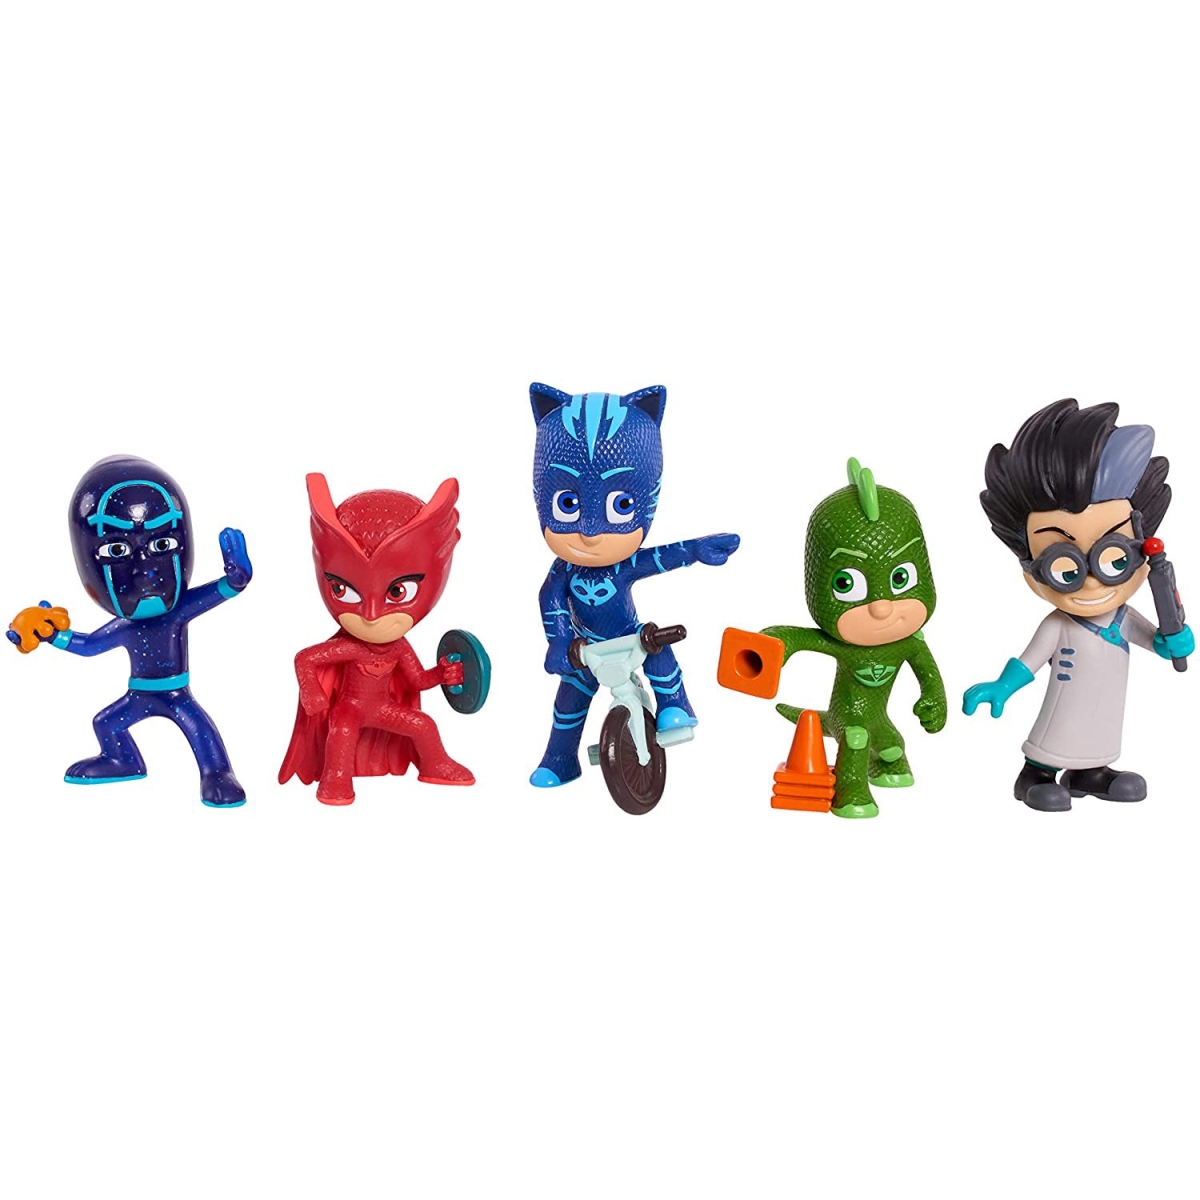 Picture of Just Play 30387170 5 Piece PJ Masks Collectable Figure Set